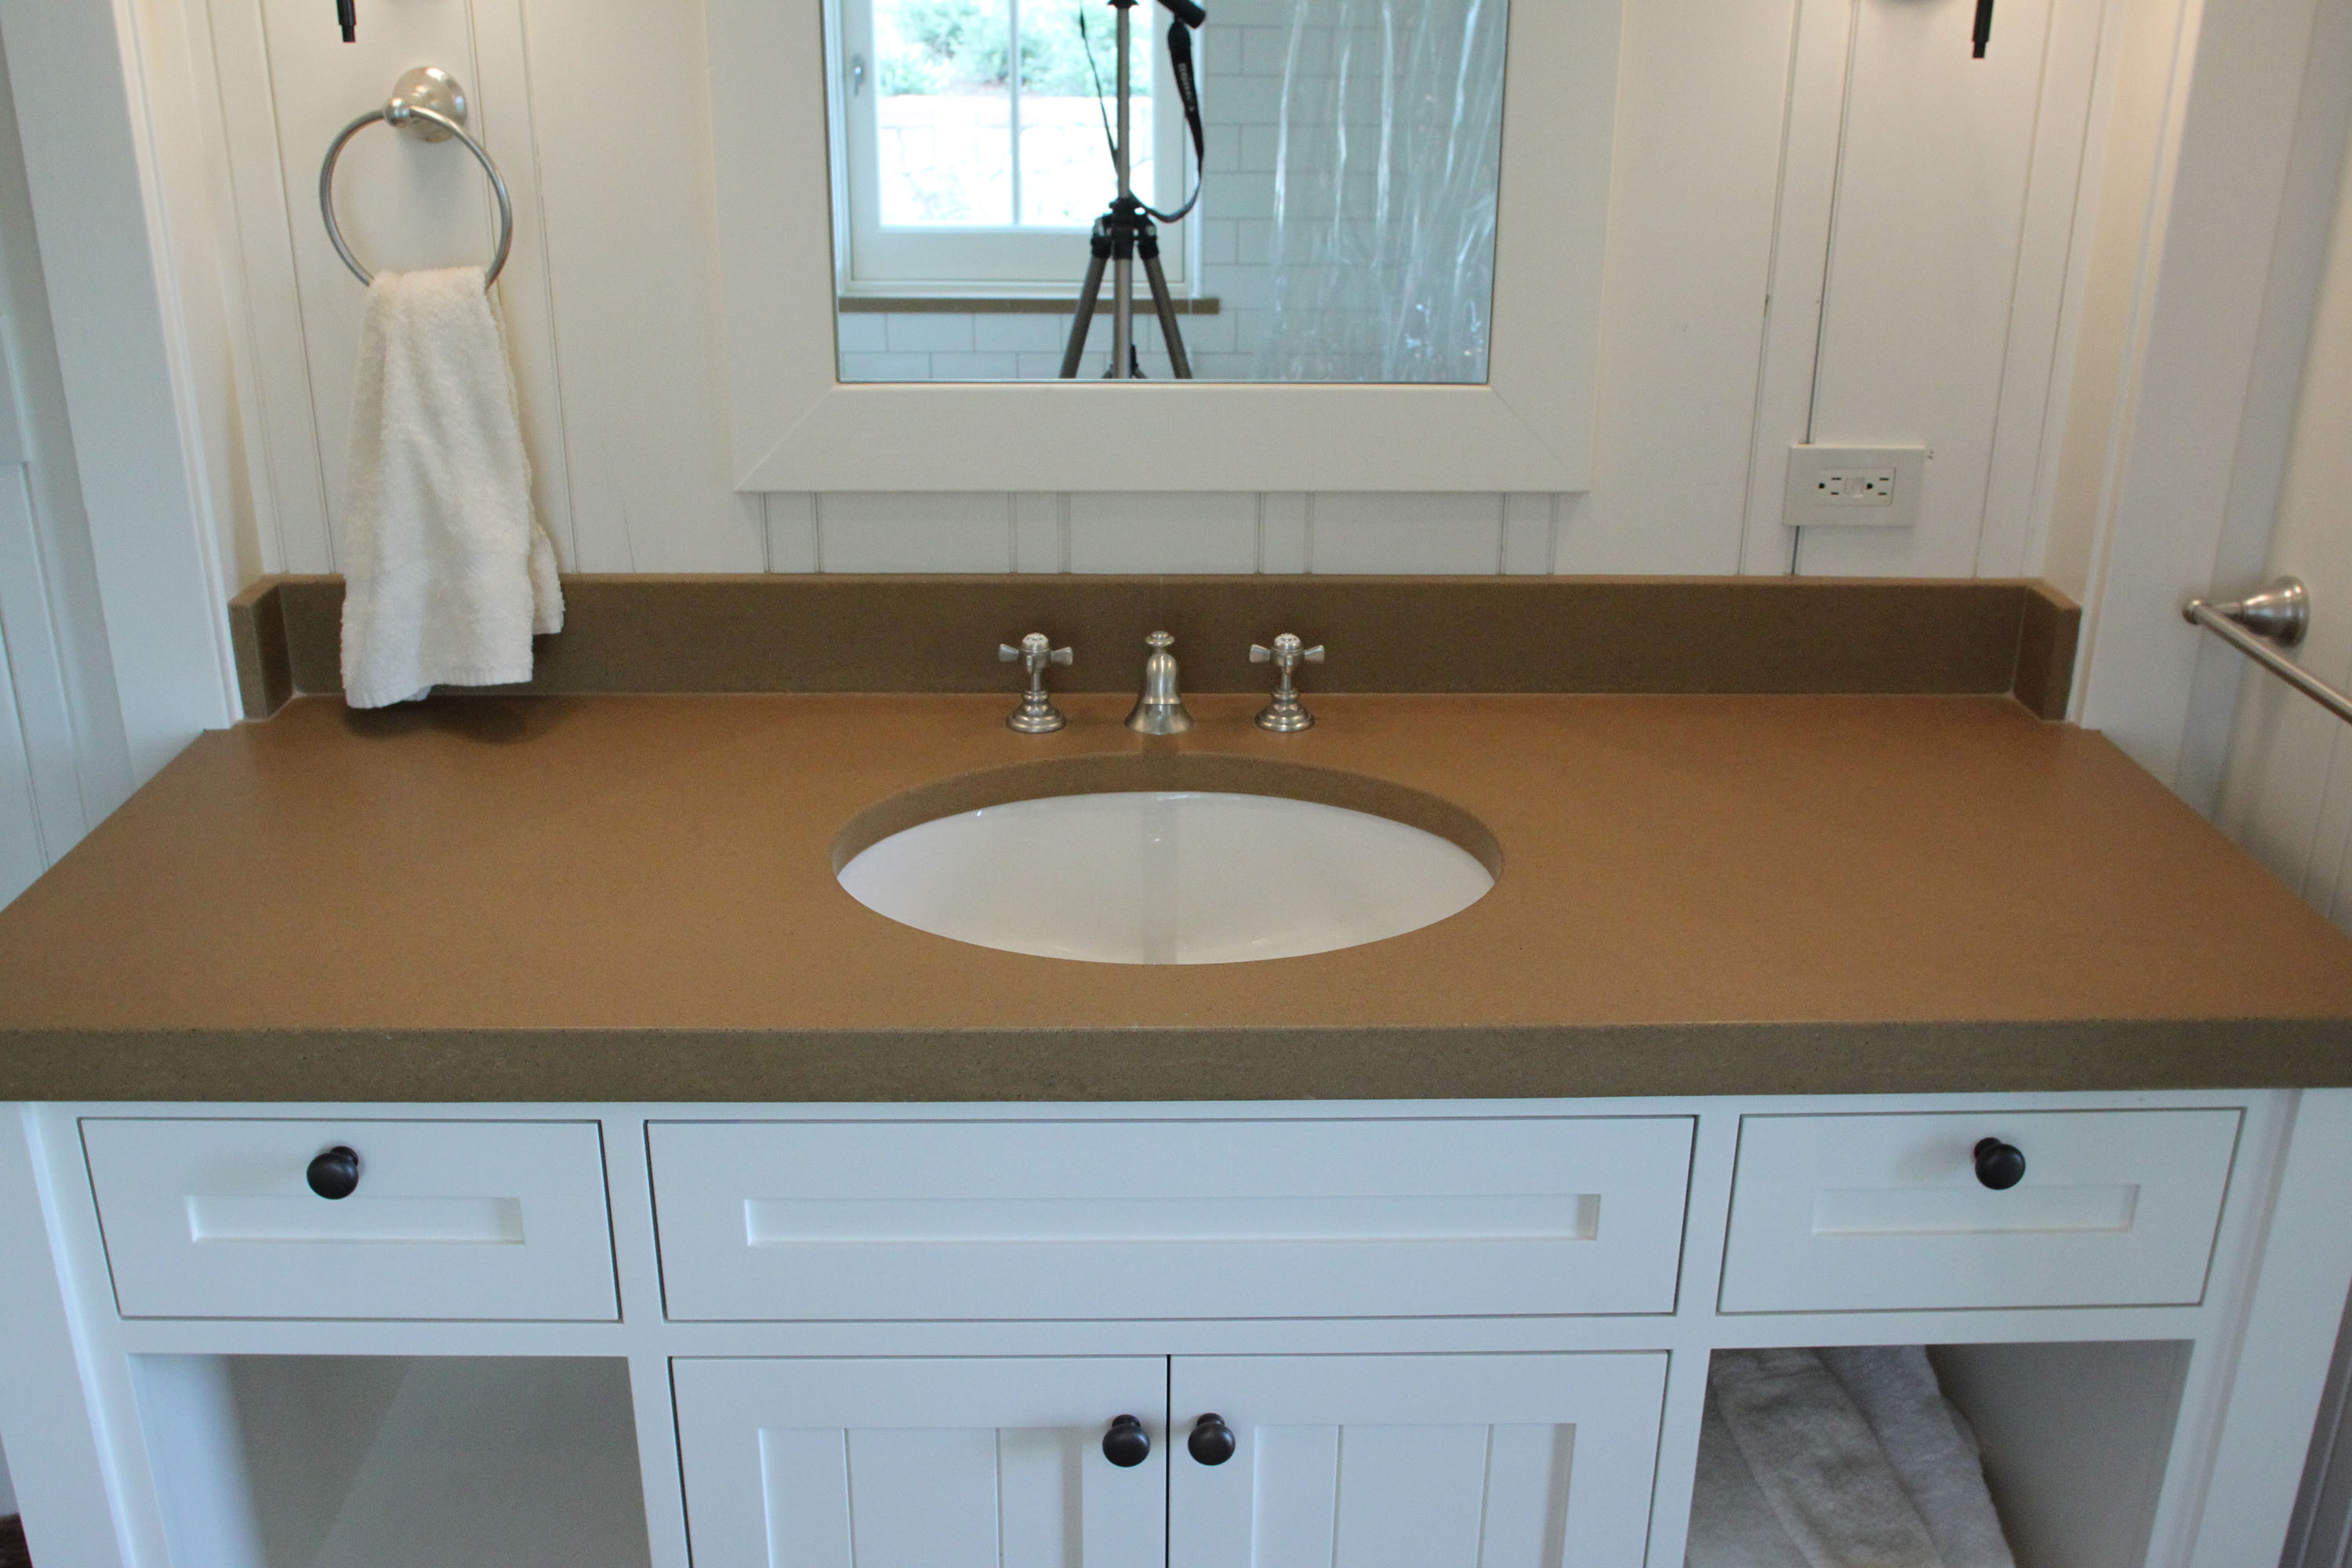 UnderMount Sink with Concrete Countertop, N610 Earth